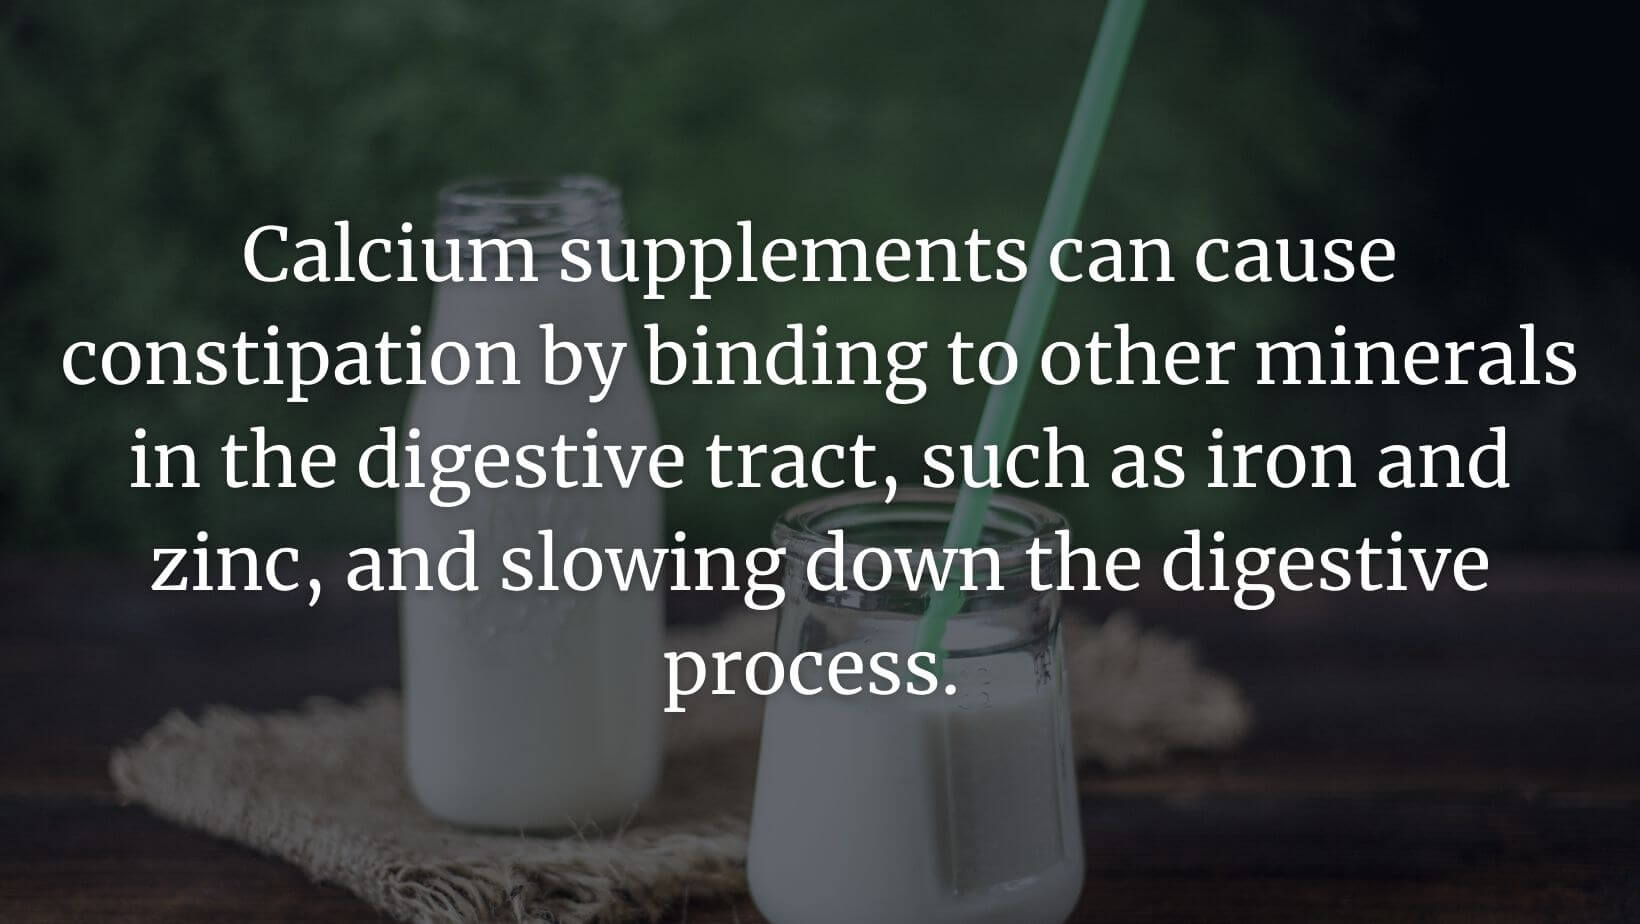 calcium supplements and constipation explanation